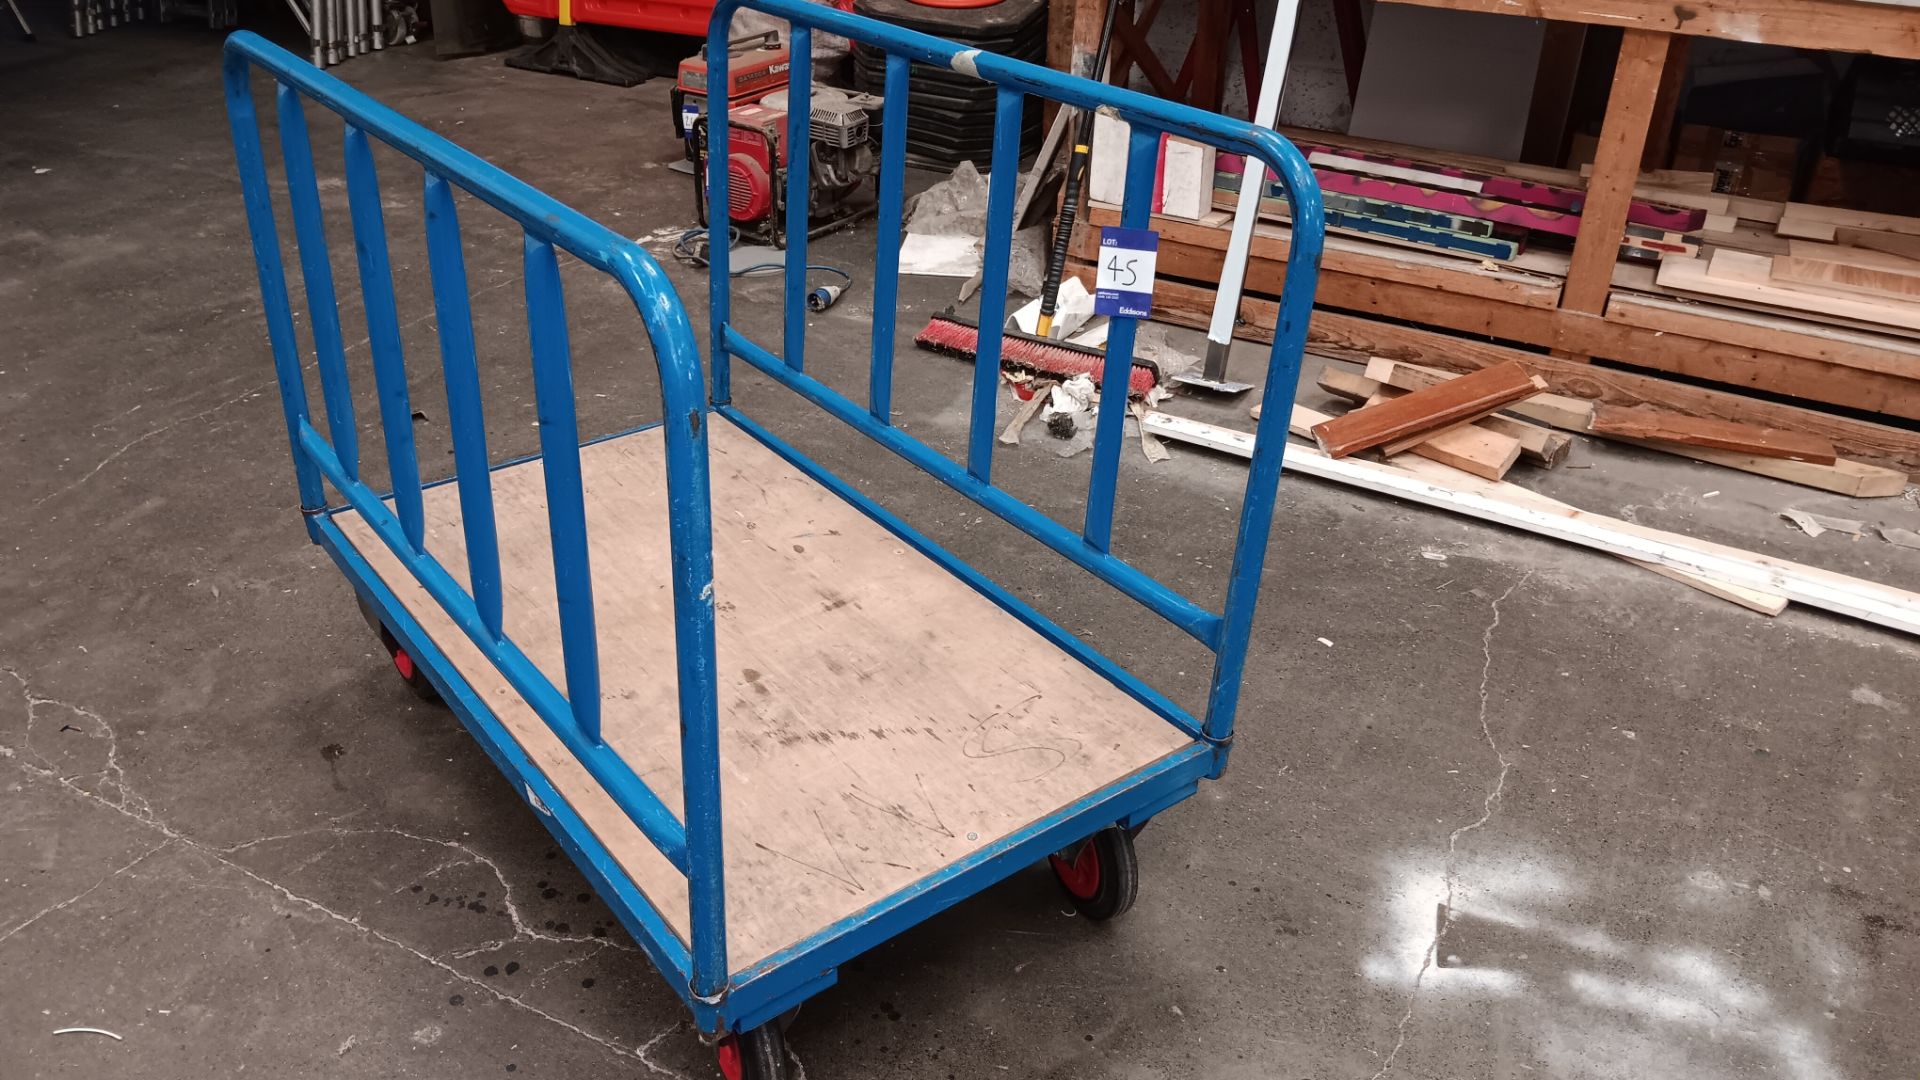 2 sided platform truck with plywood base – Located in Unit 3